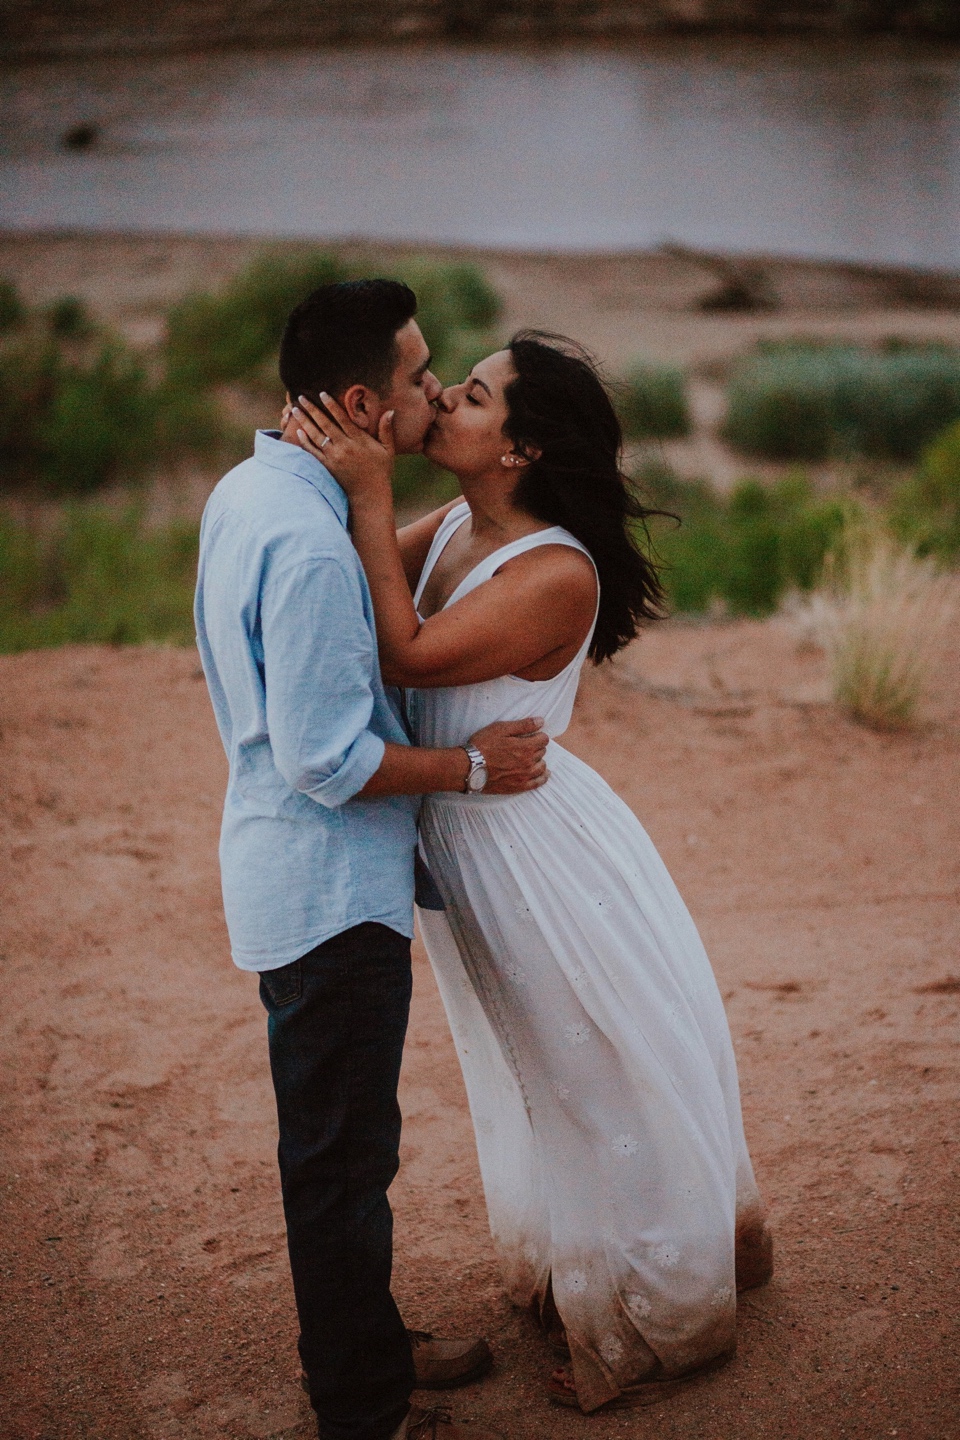  It was a blustery day in Corrales, New Mexico, but the gloomy weather didn’t stop us from capturing Brei and Christian’s beautiful engagement photos. The love these two have for one another and the strong bond they have in their faith is truly incre